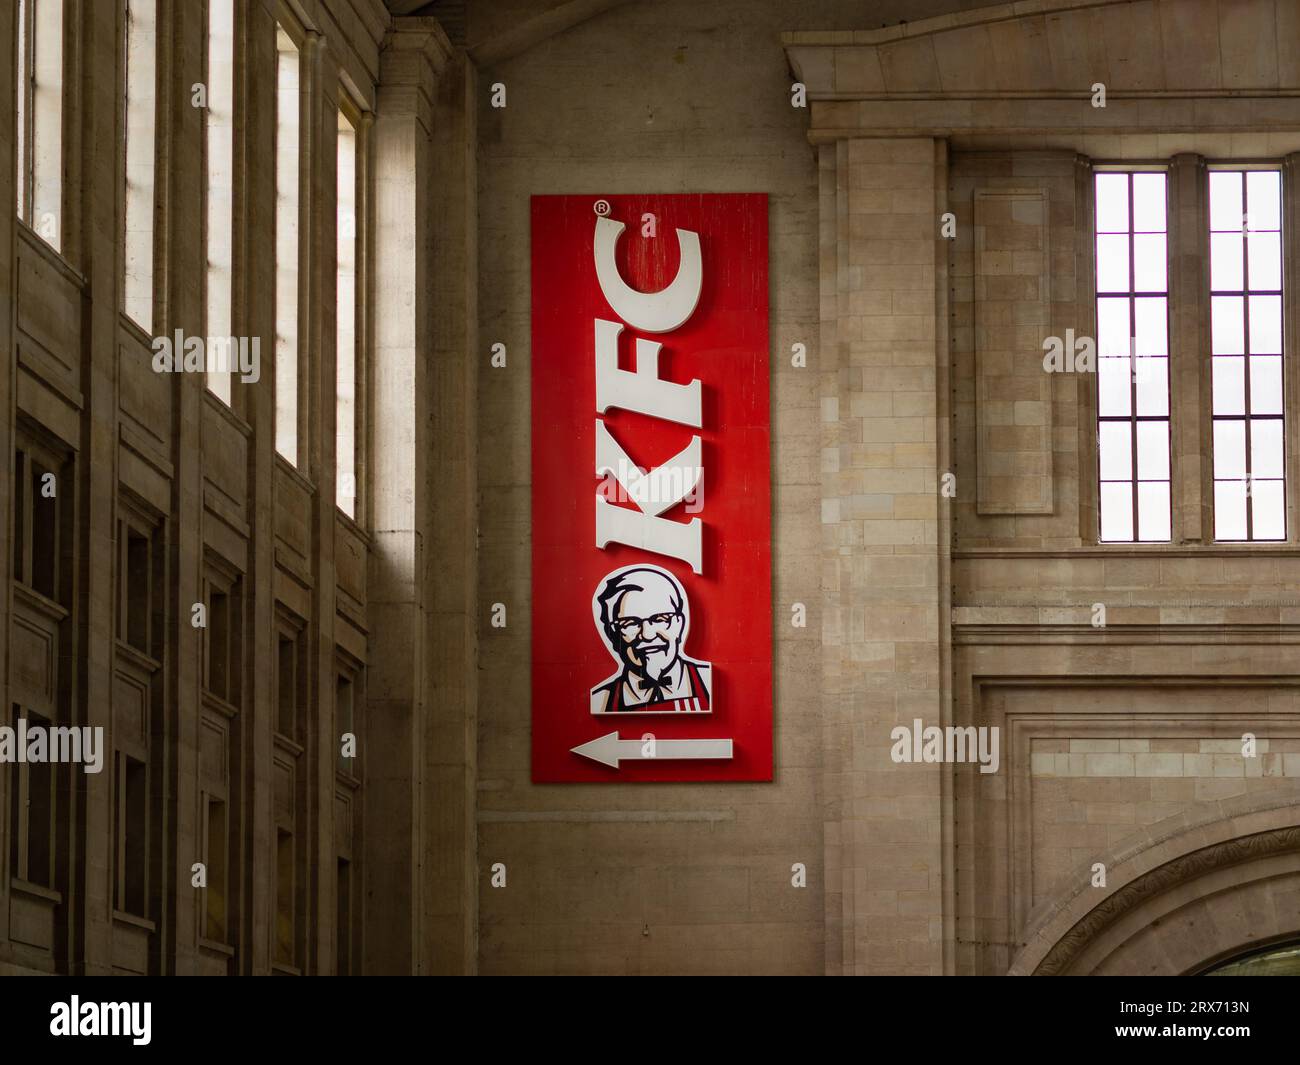 KFC logo sign of the Kentucky Fried Chicken restaurant company. American fast food lifestyle with a franchise business model and many stores. Stock Photo